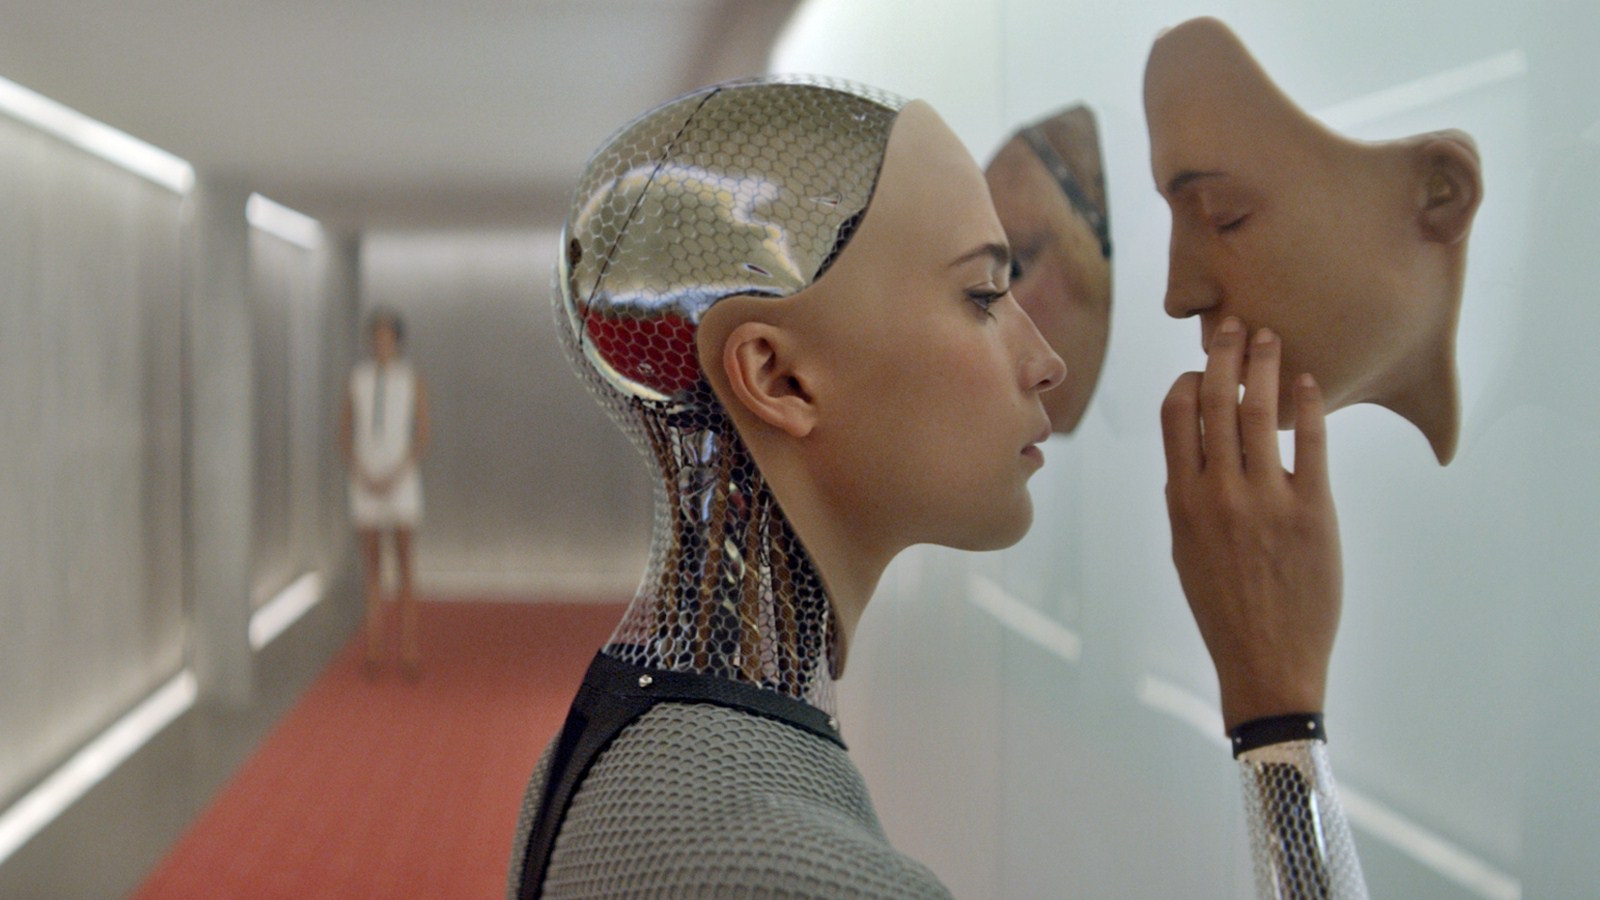 EX MACHINA Is Thoughtful and Challenging Science-Fiction